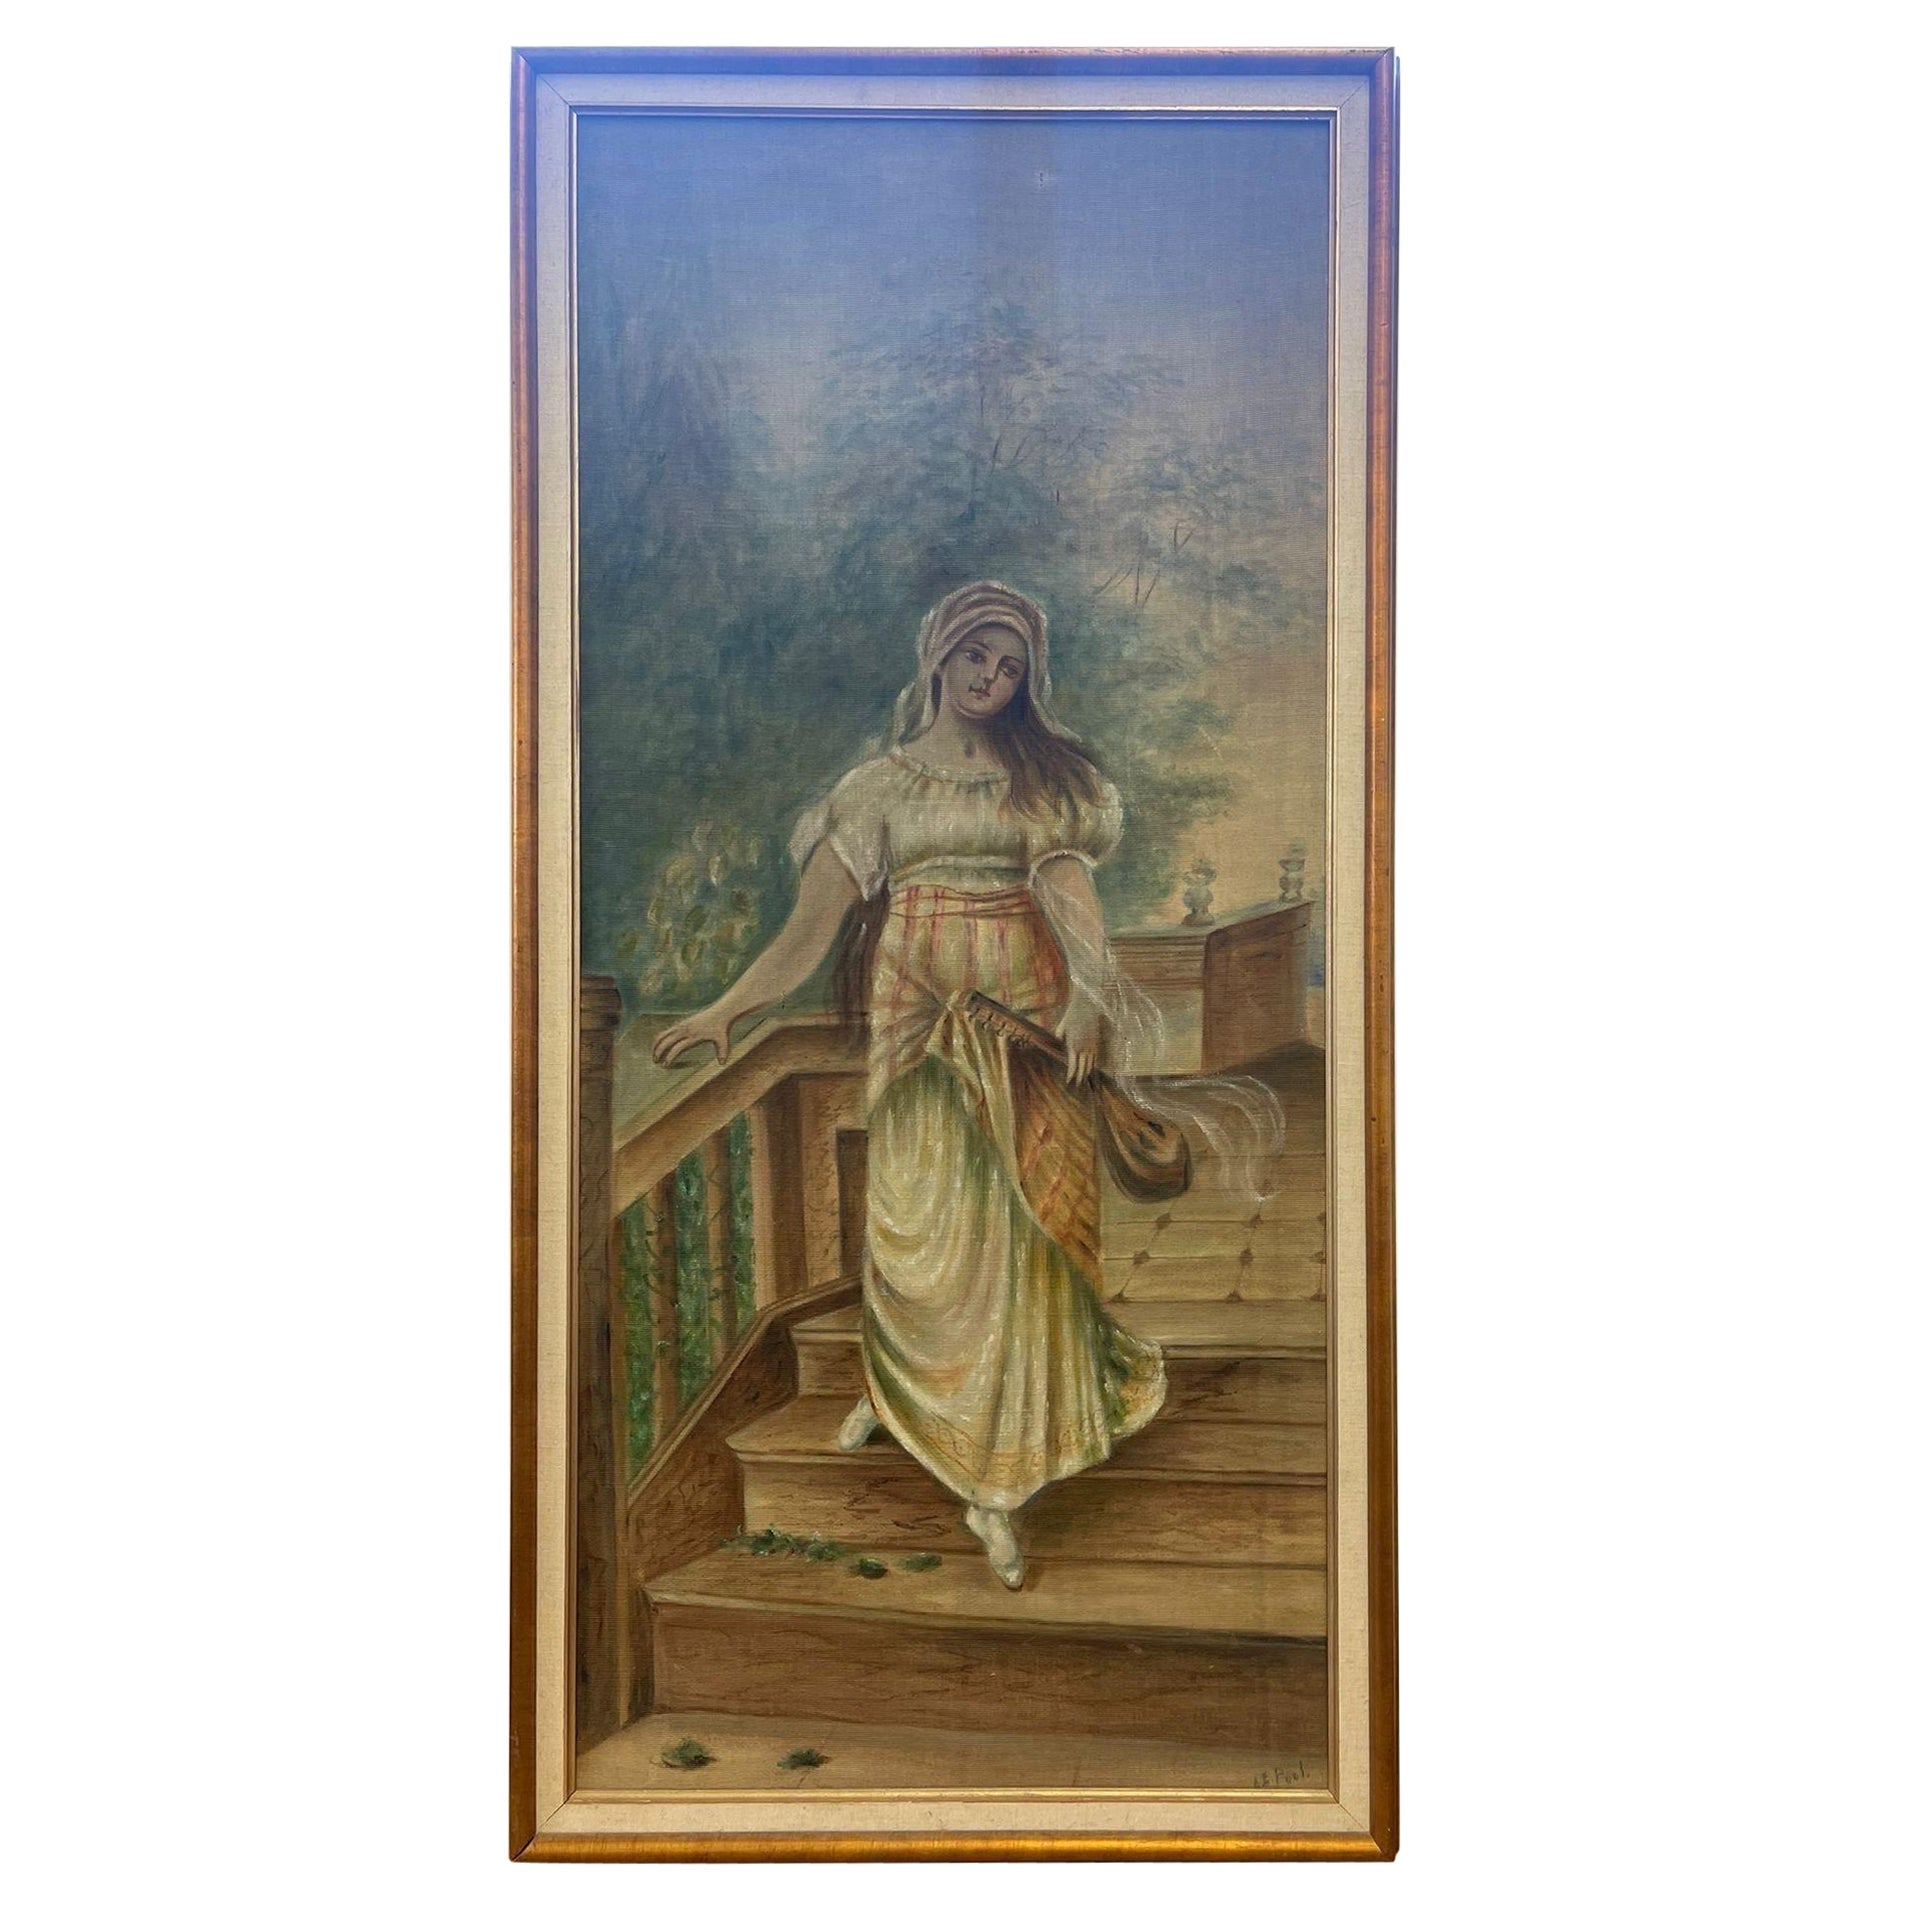 Vintage Framed and Signed Original Painted Portrait of a Woman on Fabric.